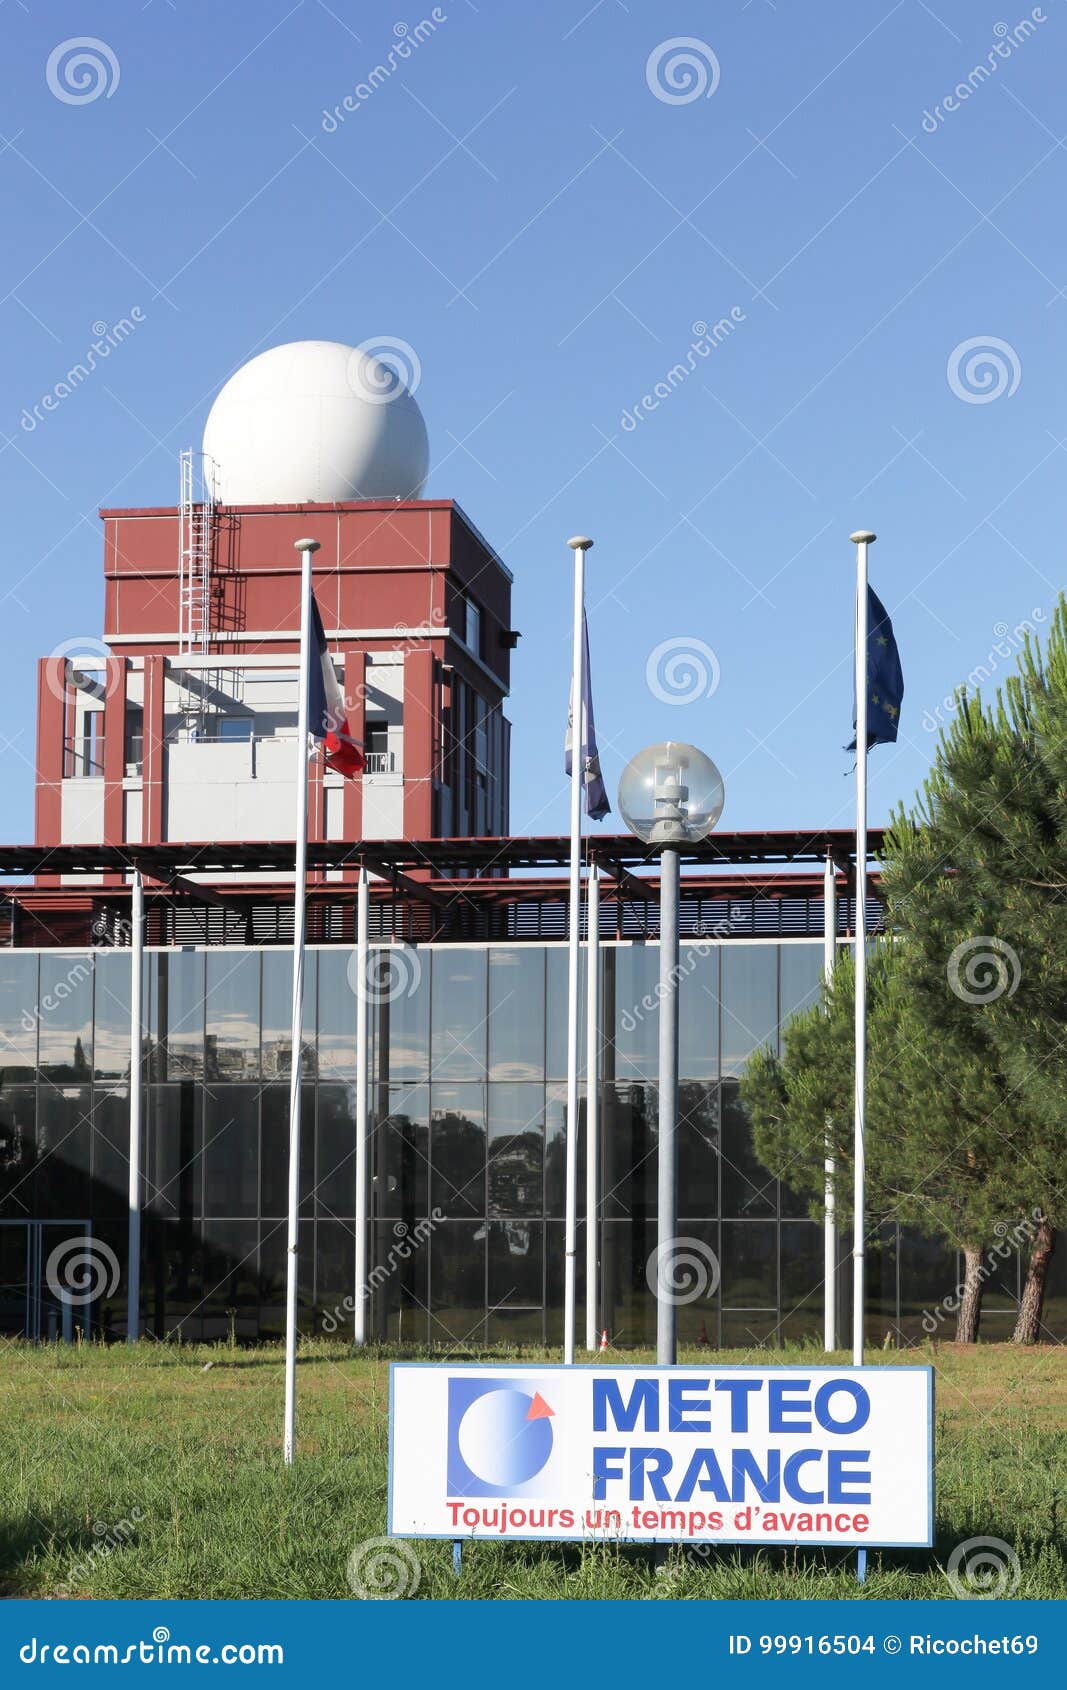 Station and Building of Meteo France in Merignac Near Bordeaux Editorial  Stock Image - Image of rainy, outdoors: 99916504